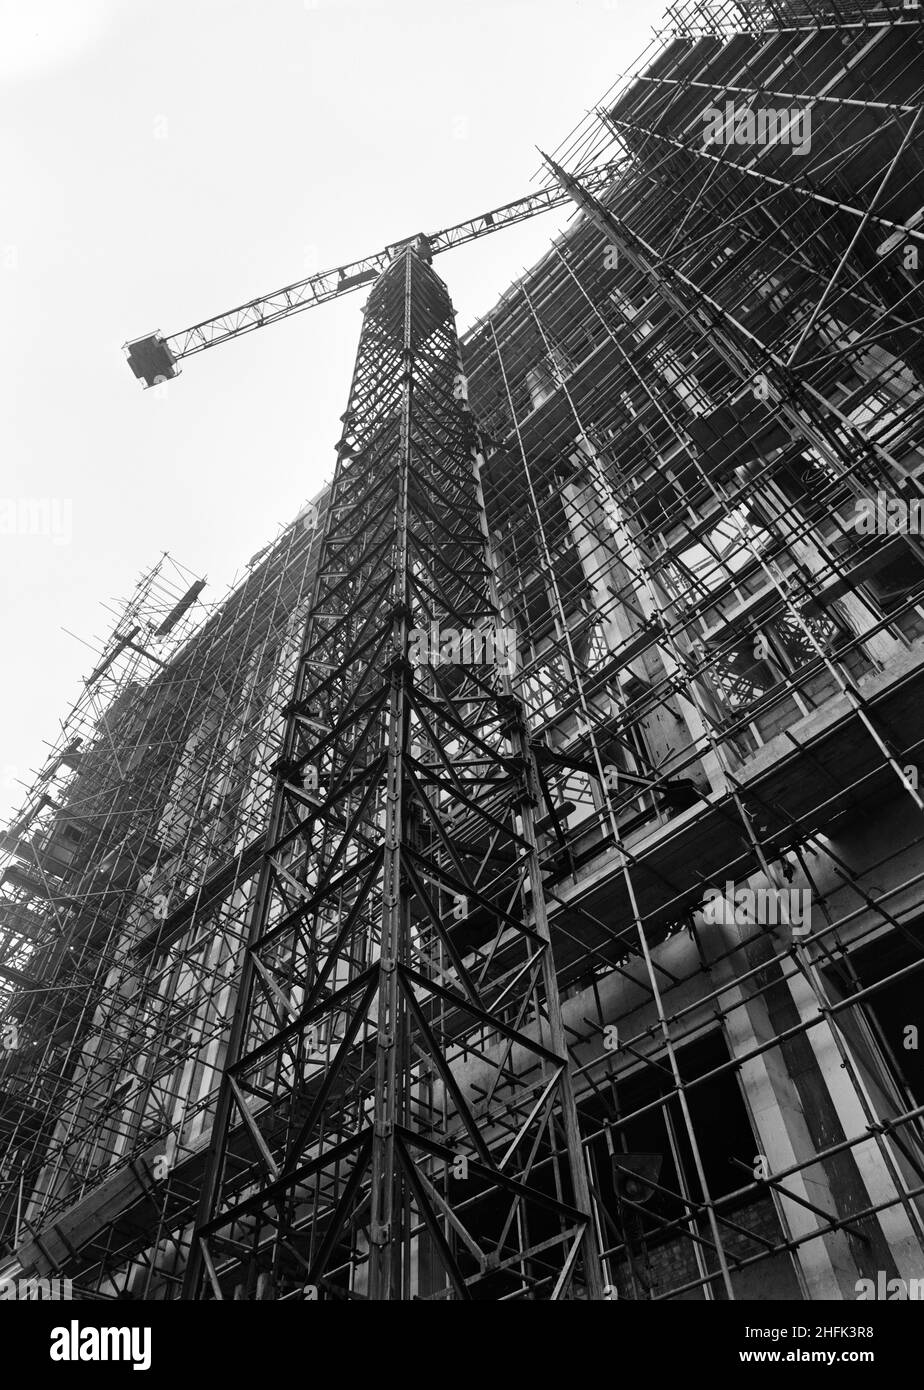 Paternoster Square, City of London, 14/12/1962. Looking up at a tower crane against a maze of scaffolding during the construction of the Paternoster development. Work on the Paternoster development was carried out in a joint venture by John Laing Construction Limited, Trollope and Colls Limited, and George Wimpey and Company Limited. The scheme involved the redevelopment of a seven acre site on the north side of St Paul&#x2019;s Cathedral. The site had been almost entirely devastated during an incendiary raid in December 1940. The development consisted of a series of office blocks, a shopping Stock Photo